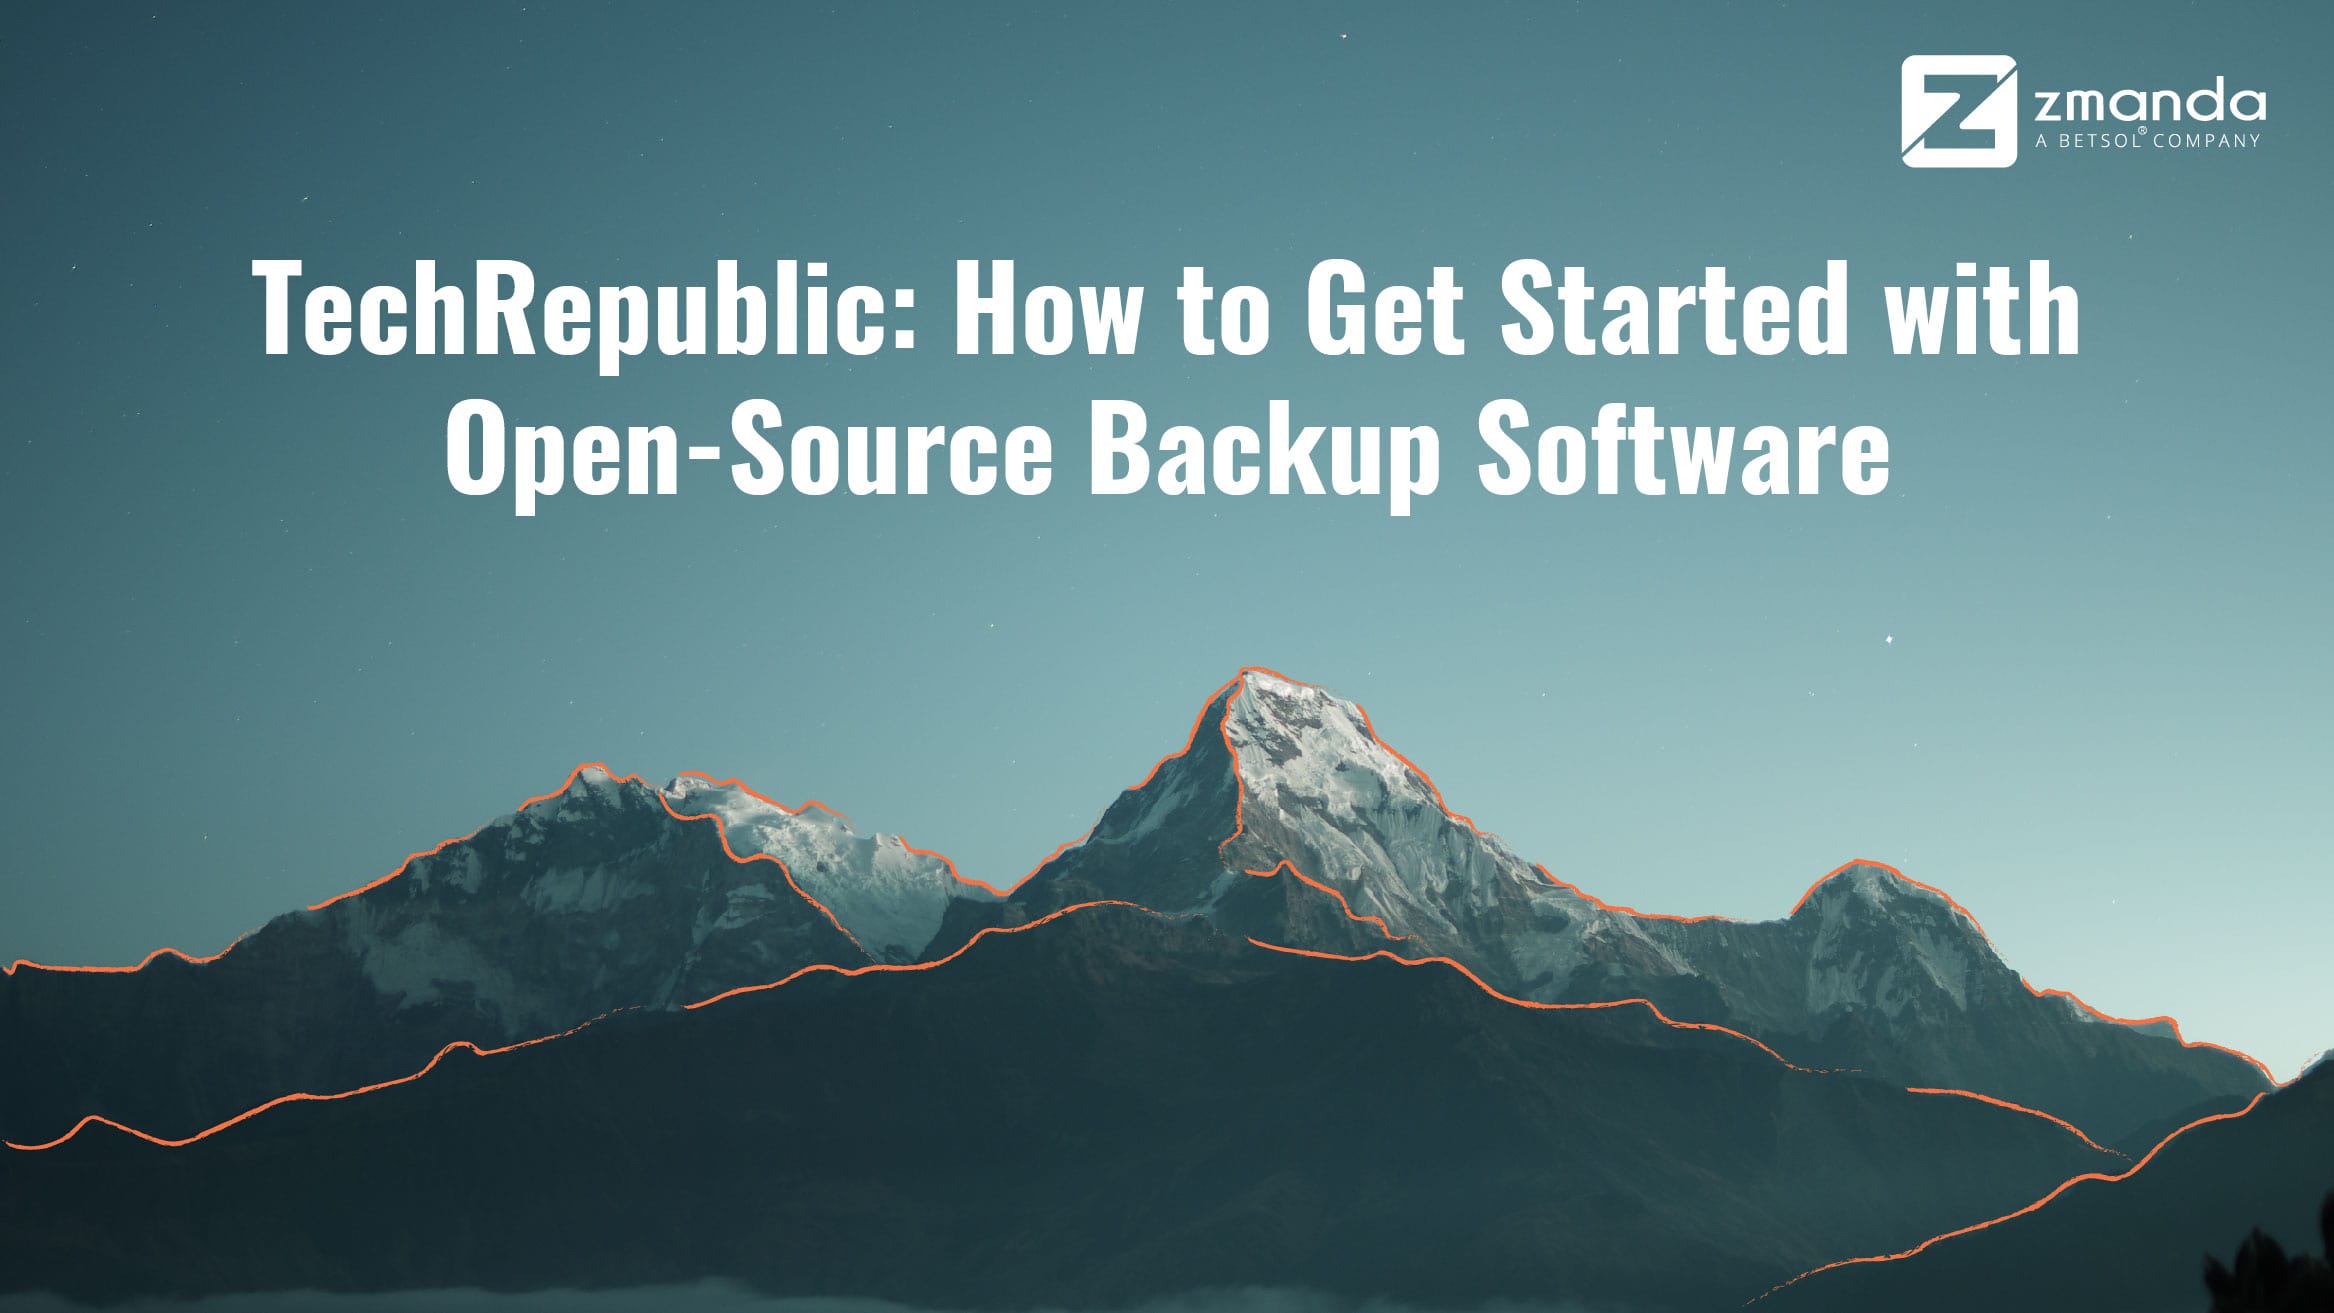 TechRepublic; How to Get Started with open-source backup software